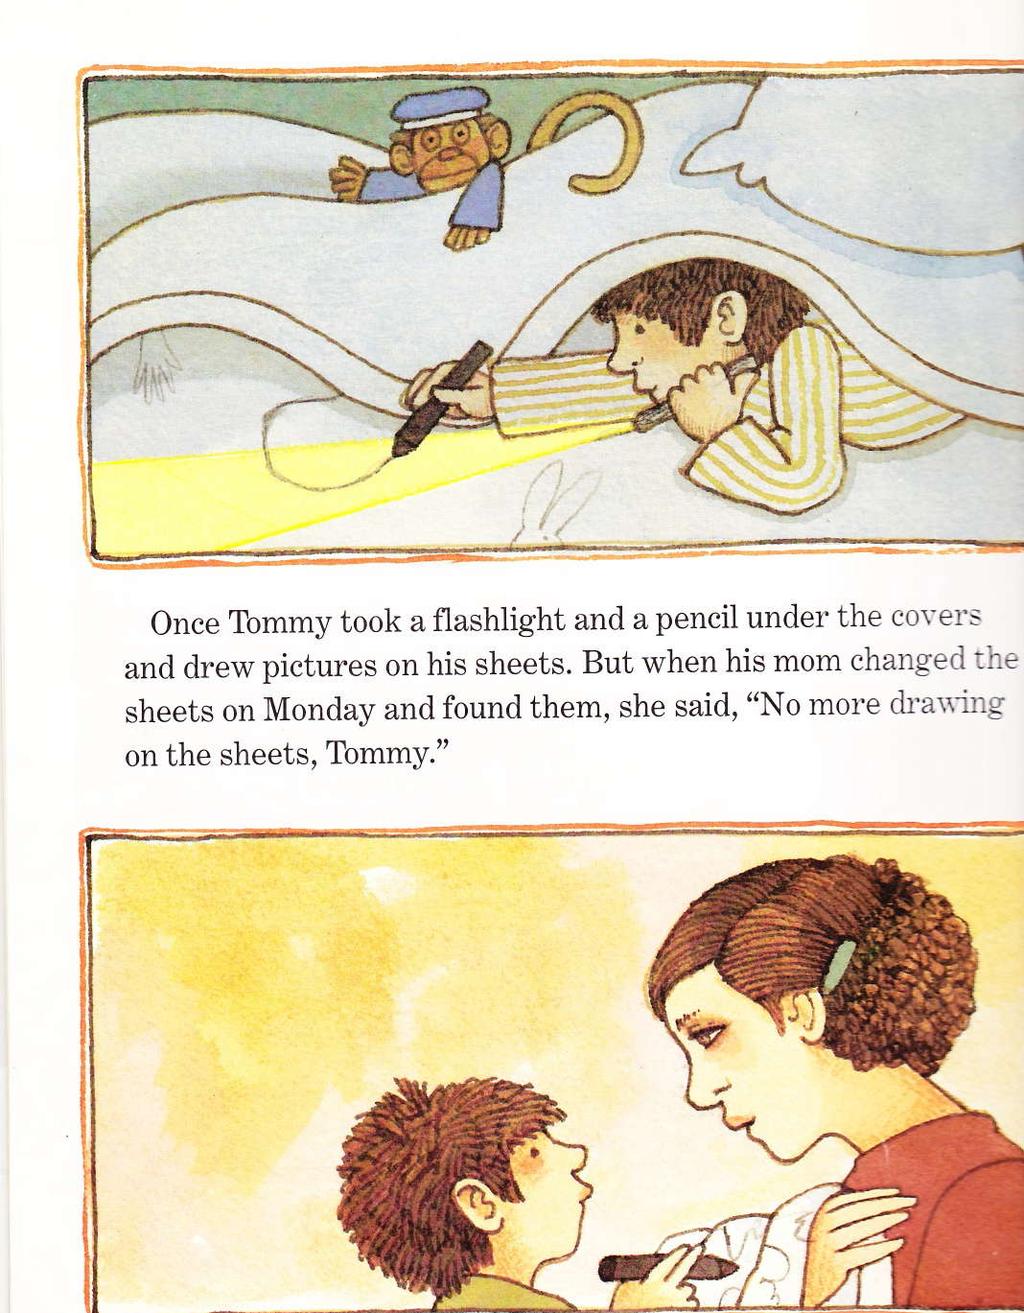 iir Once Tommy took a flashlight and a pencil under the covels and clrew pictures on his sheets.